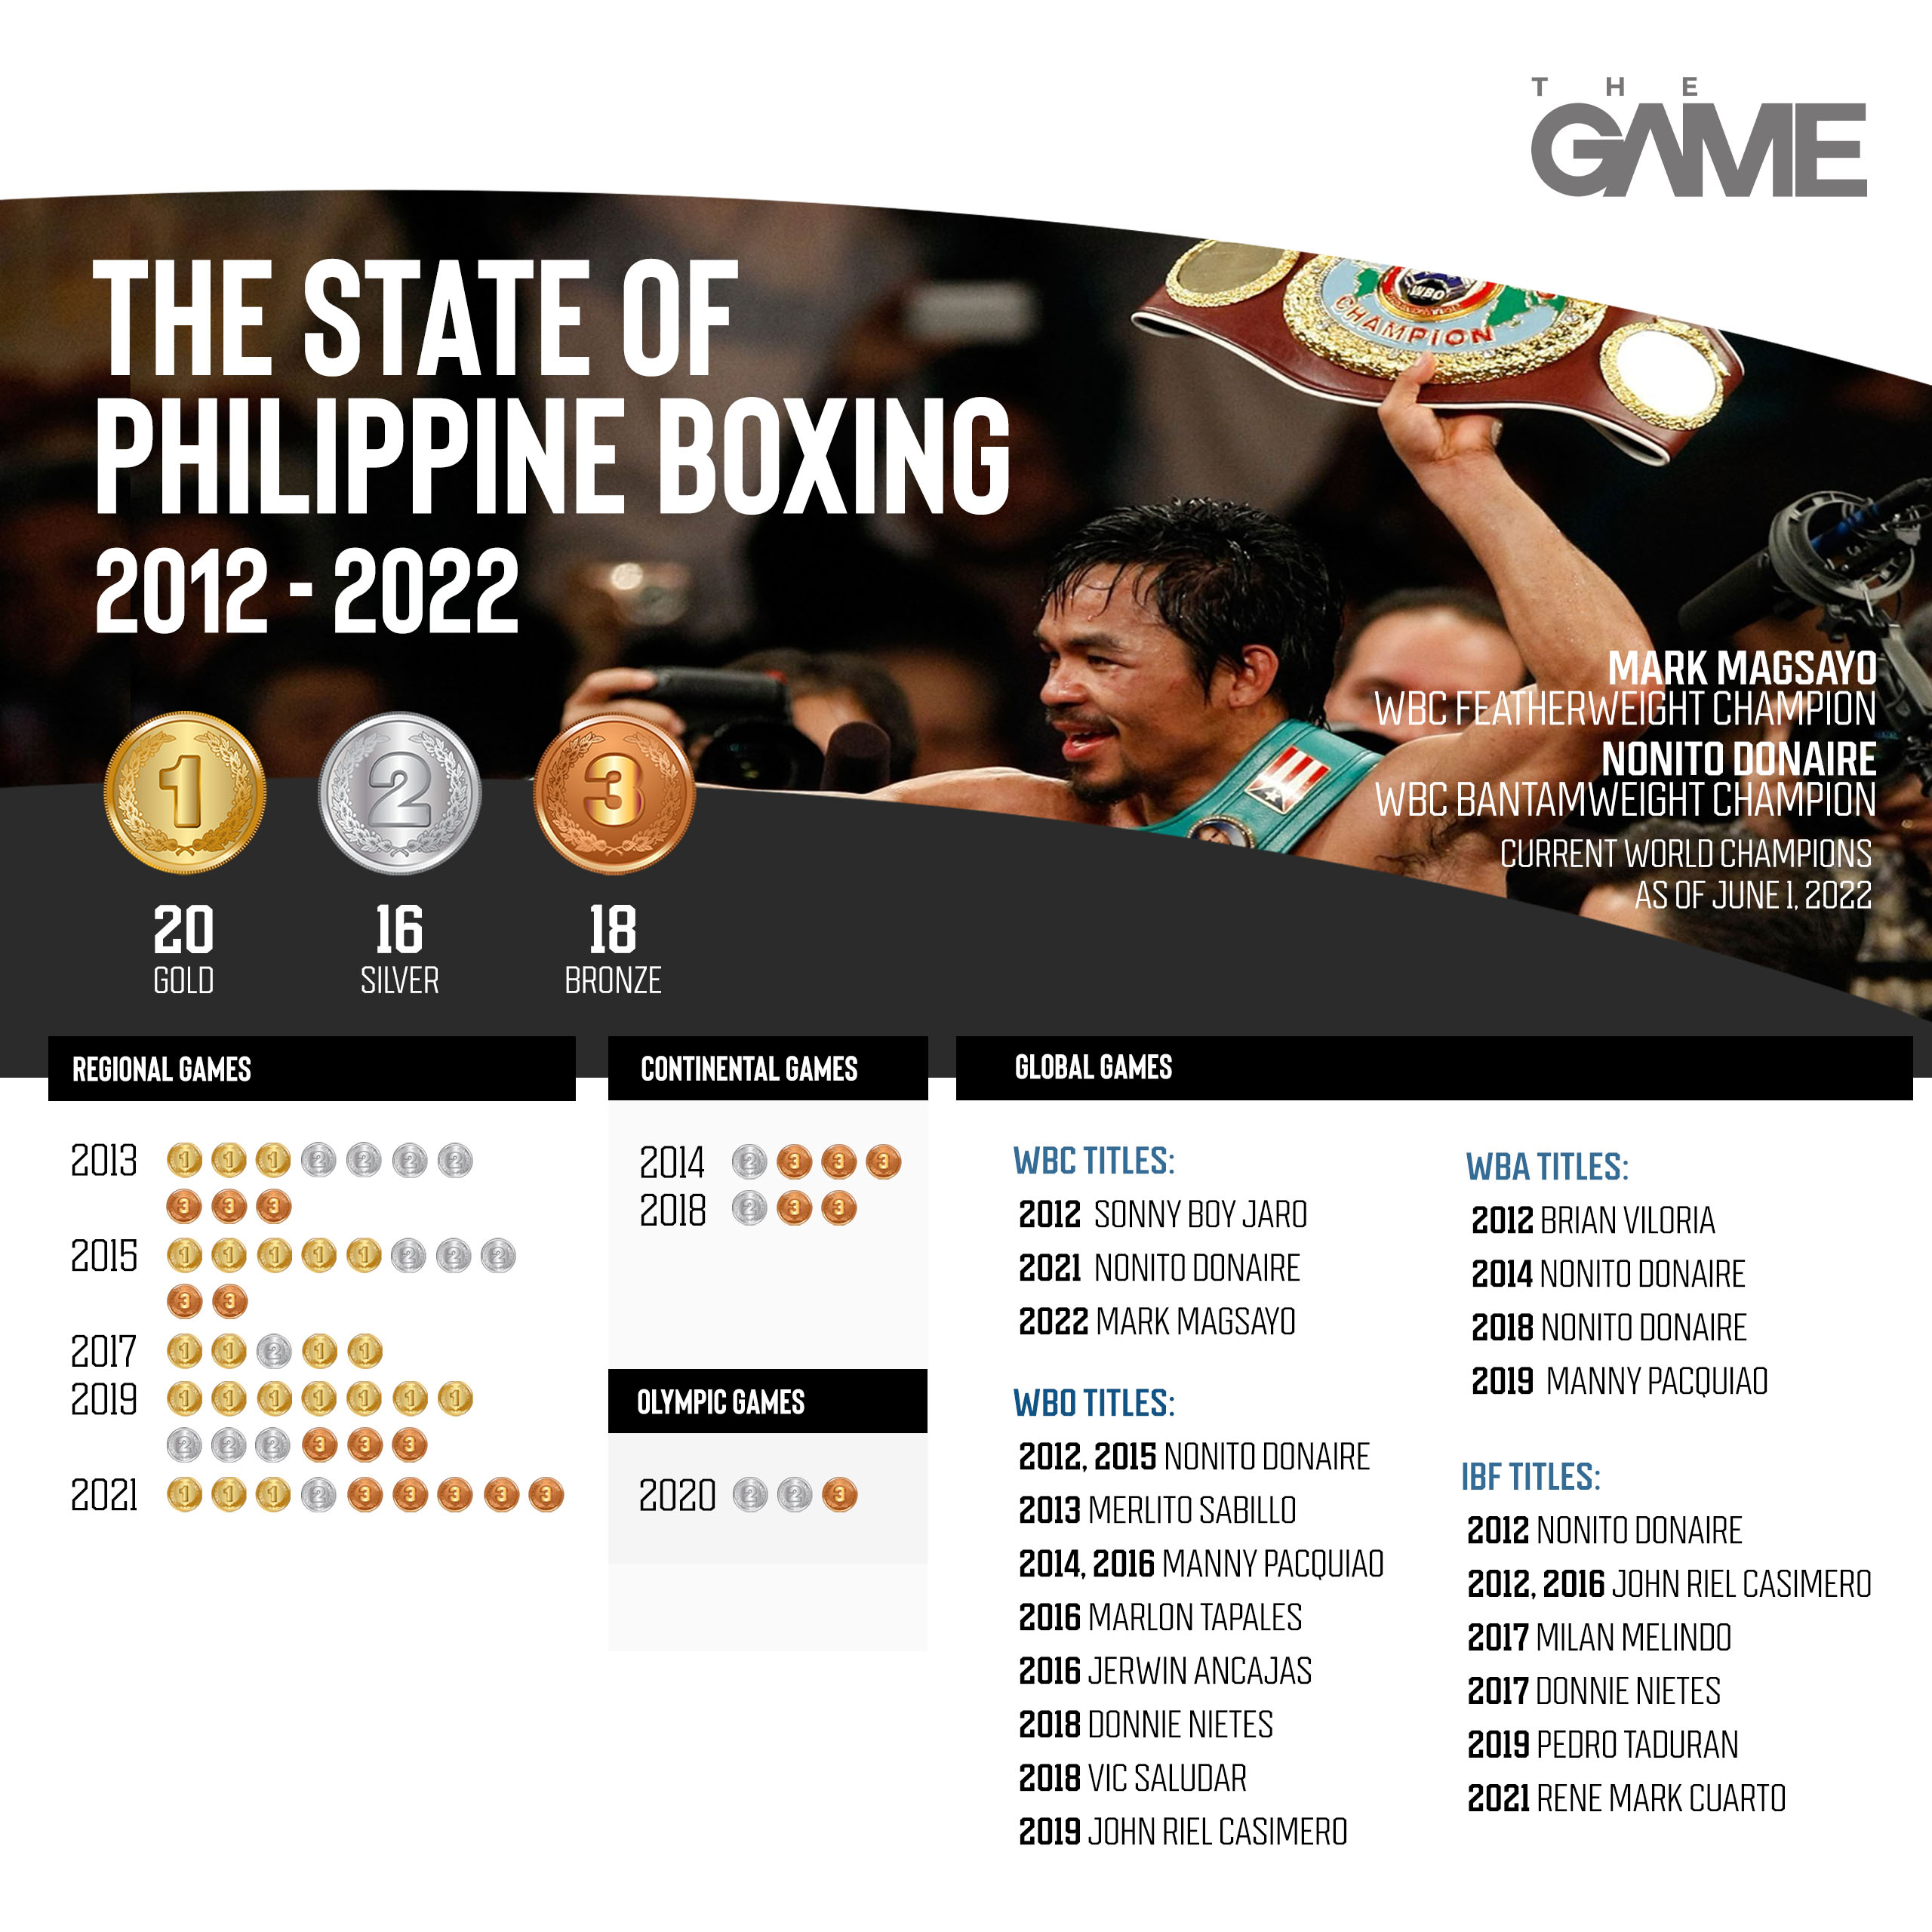 The Philippines' boxing medals and titles from 2012 to 2022.